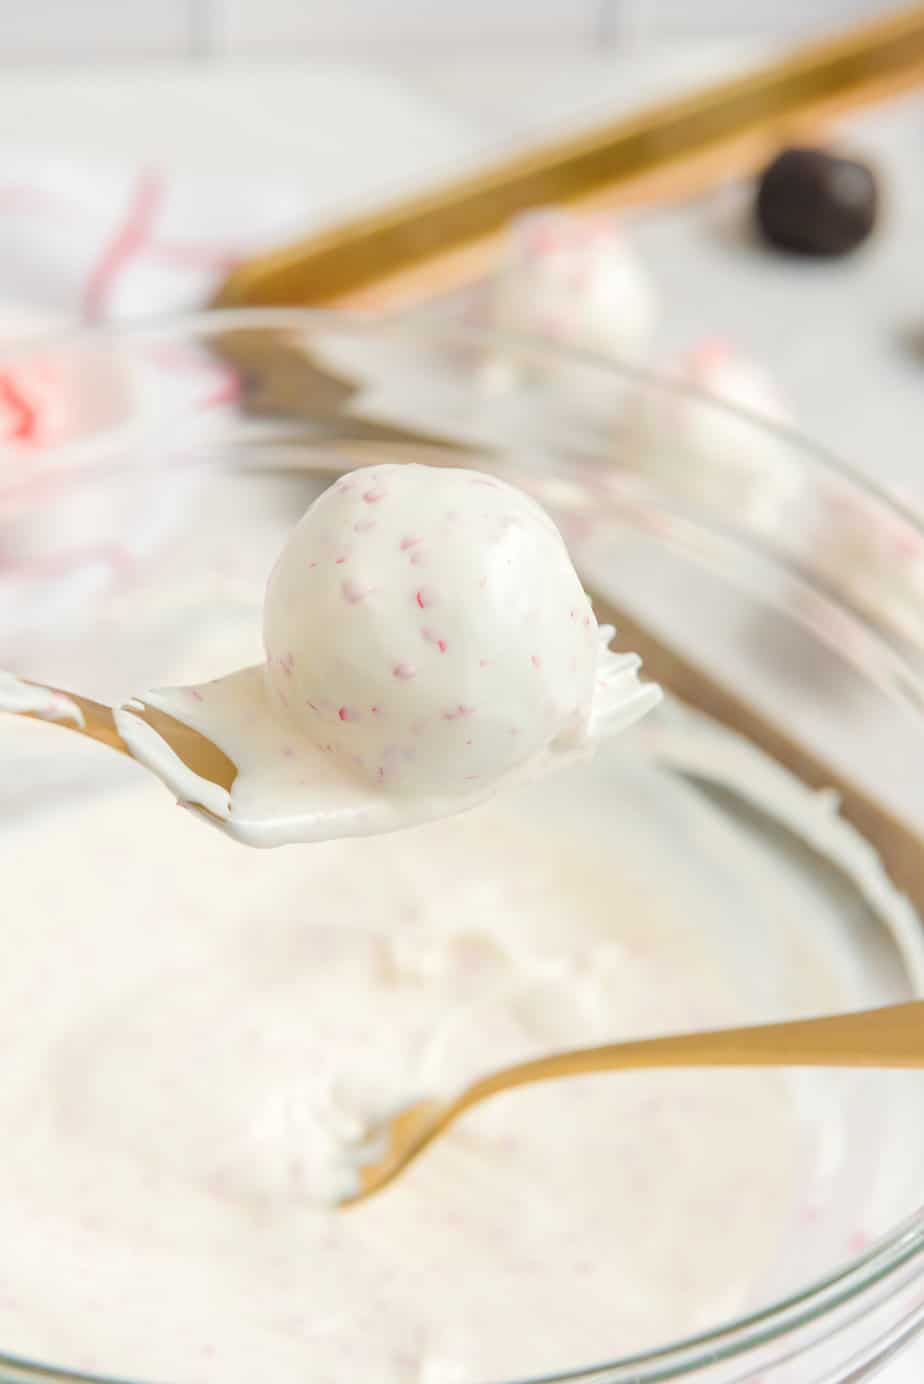 A white chocolate Oreo ball being lifted from a bowl of white chocolate by a fork with excess chocolate dripping back into the bowl from the side on a counter.